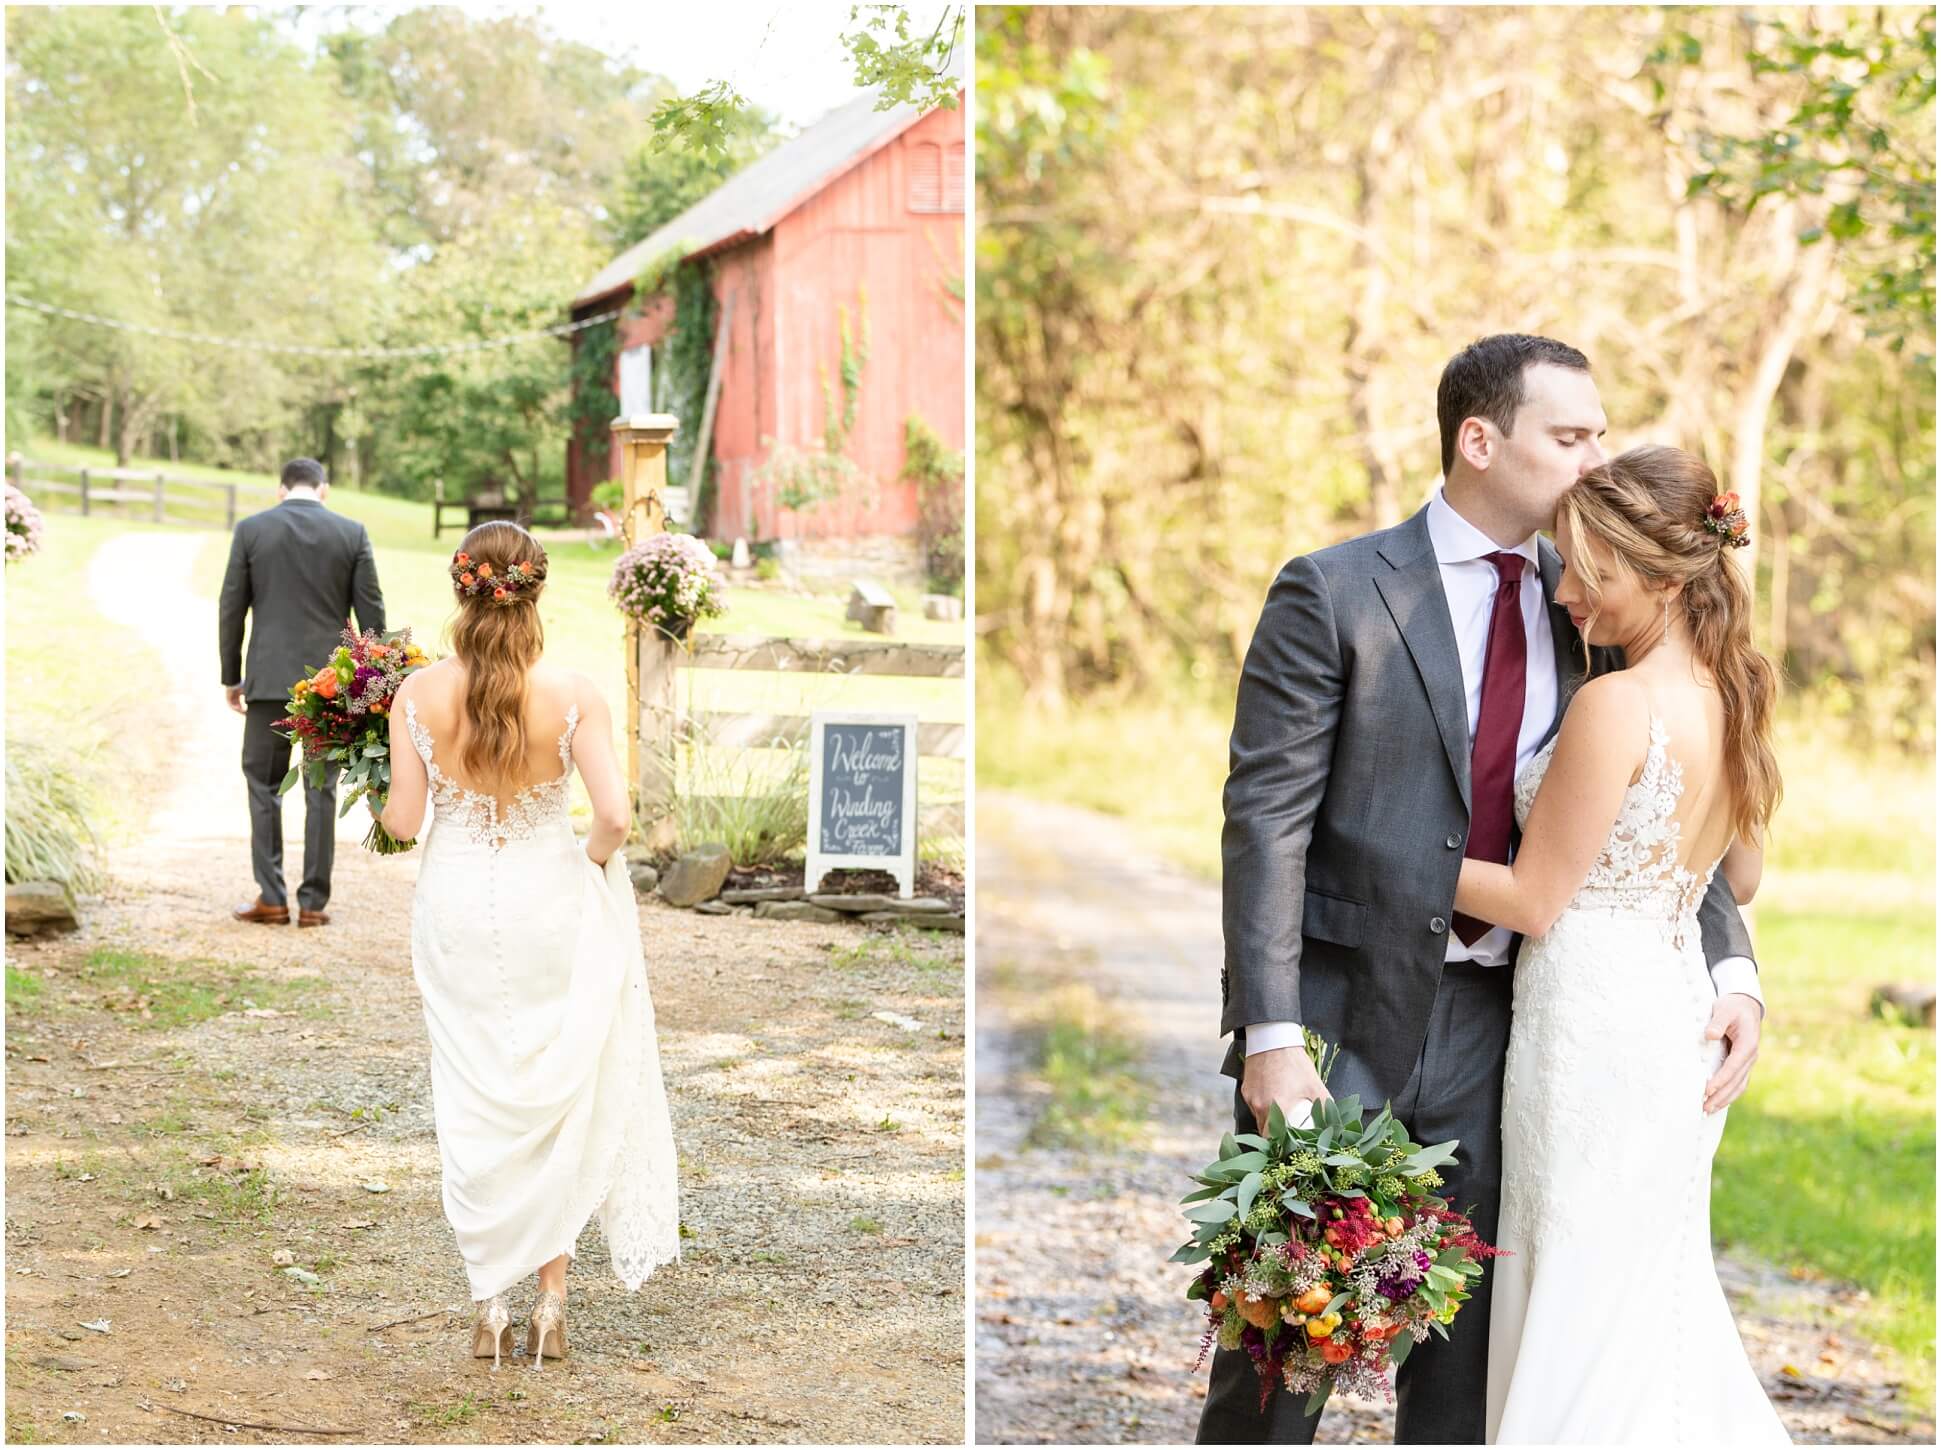 THE FIRST LOOK OUTSIDE THE BRIDAL SUITE AT WINDING CREEK FARM, VIRGINIA